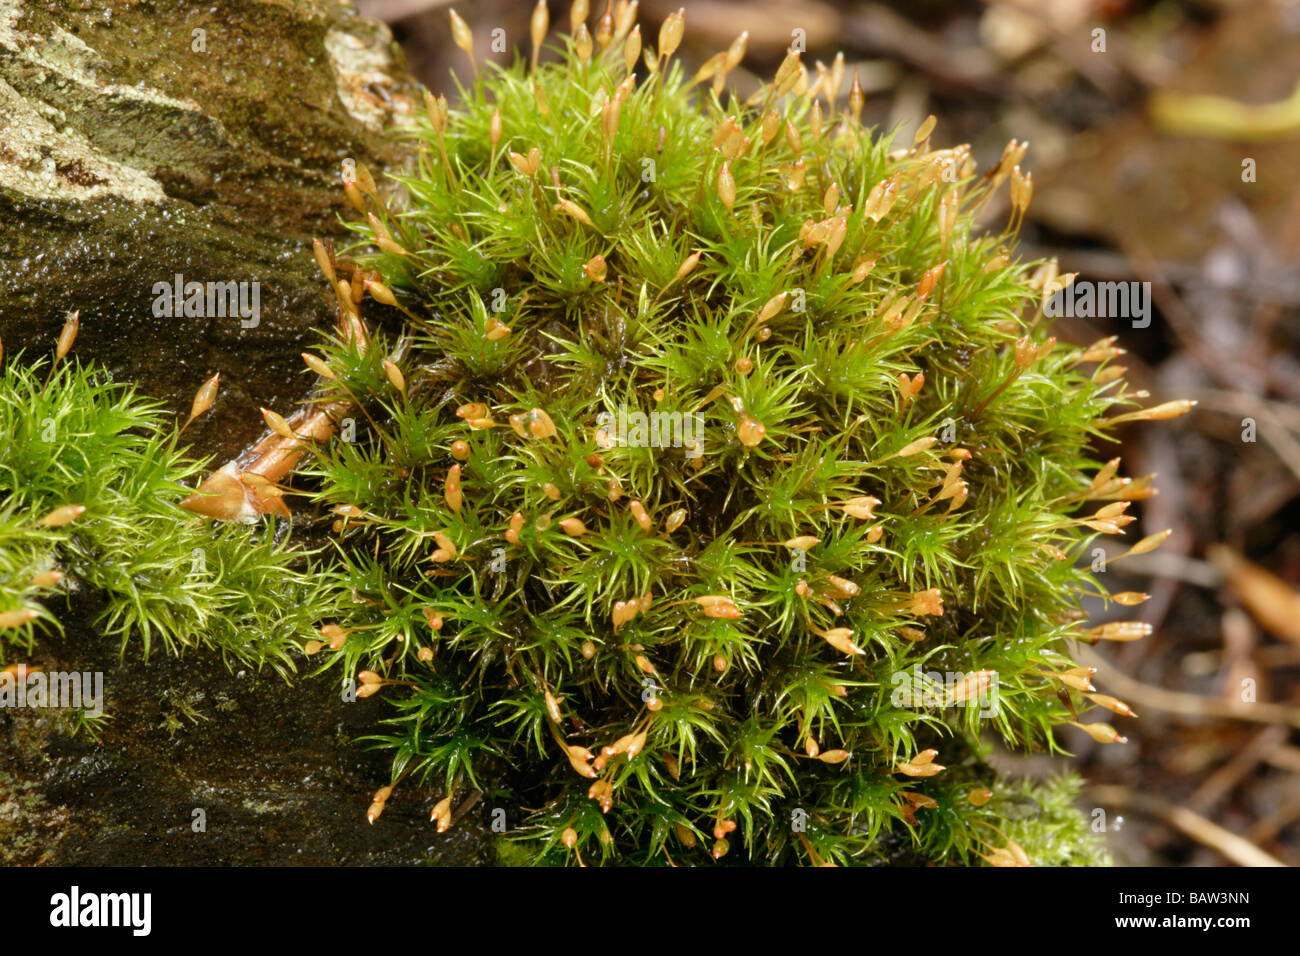 https://www.alamy.com/stock-photo-long-shanked-pincushion-moss-ptychomitrium-polyphyllum-with-capsules-23908689.html